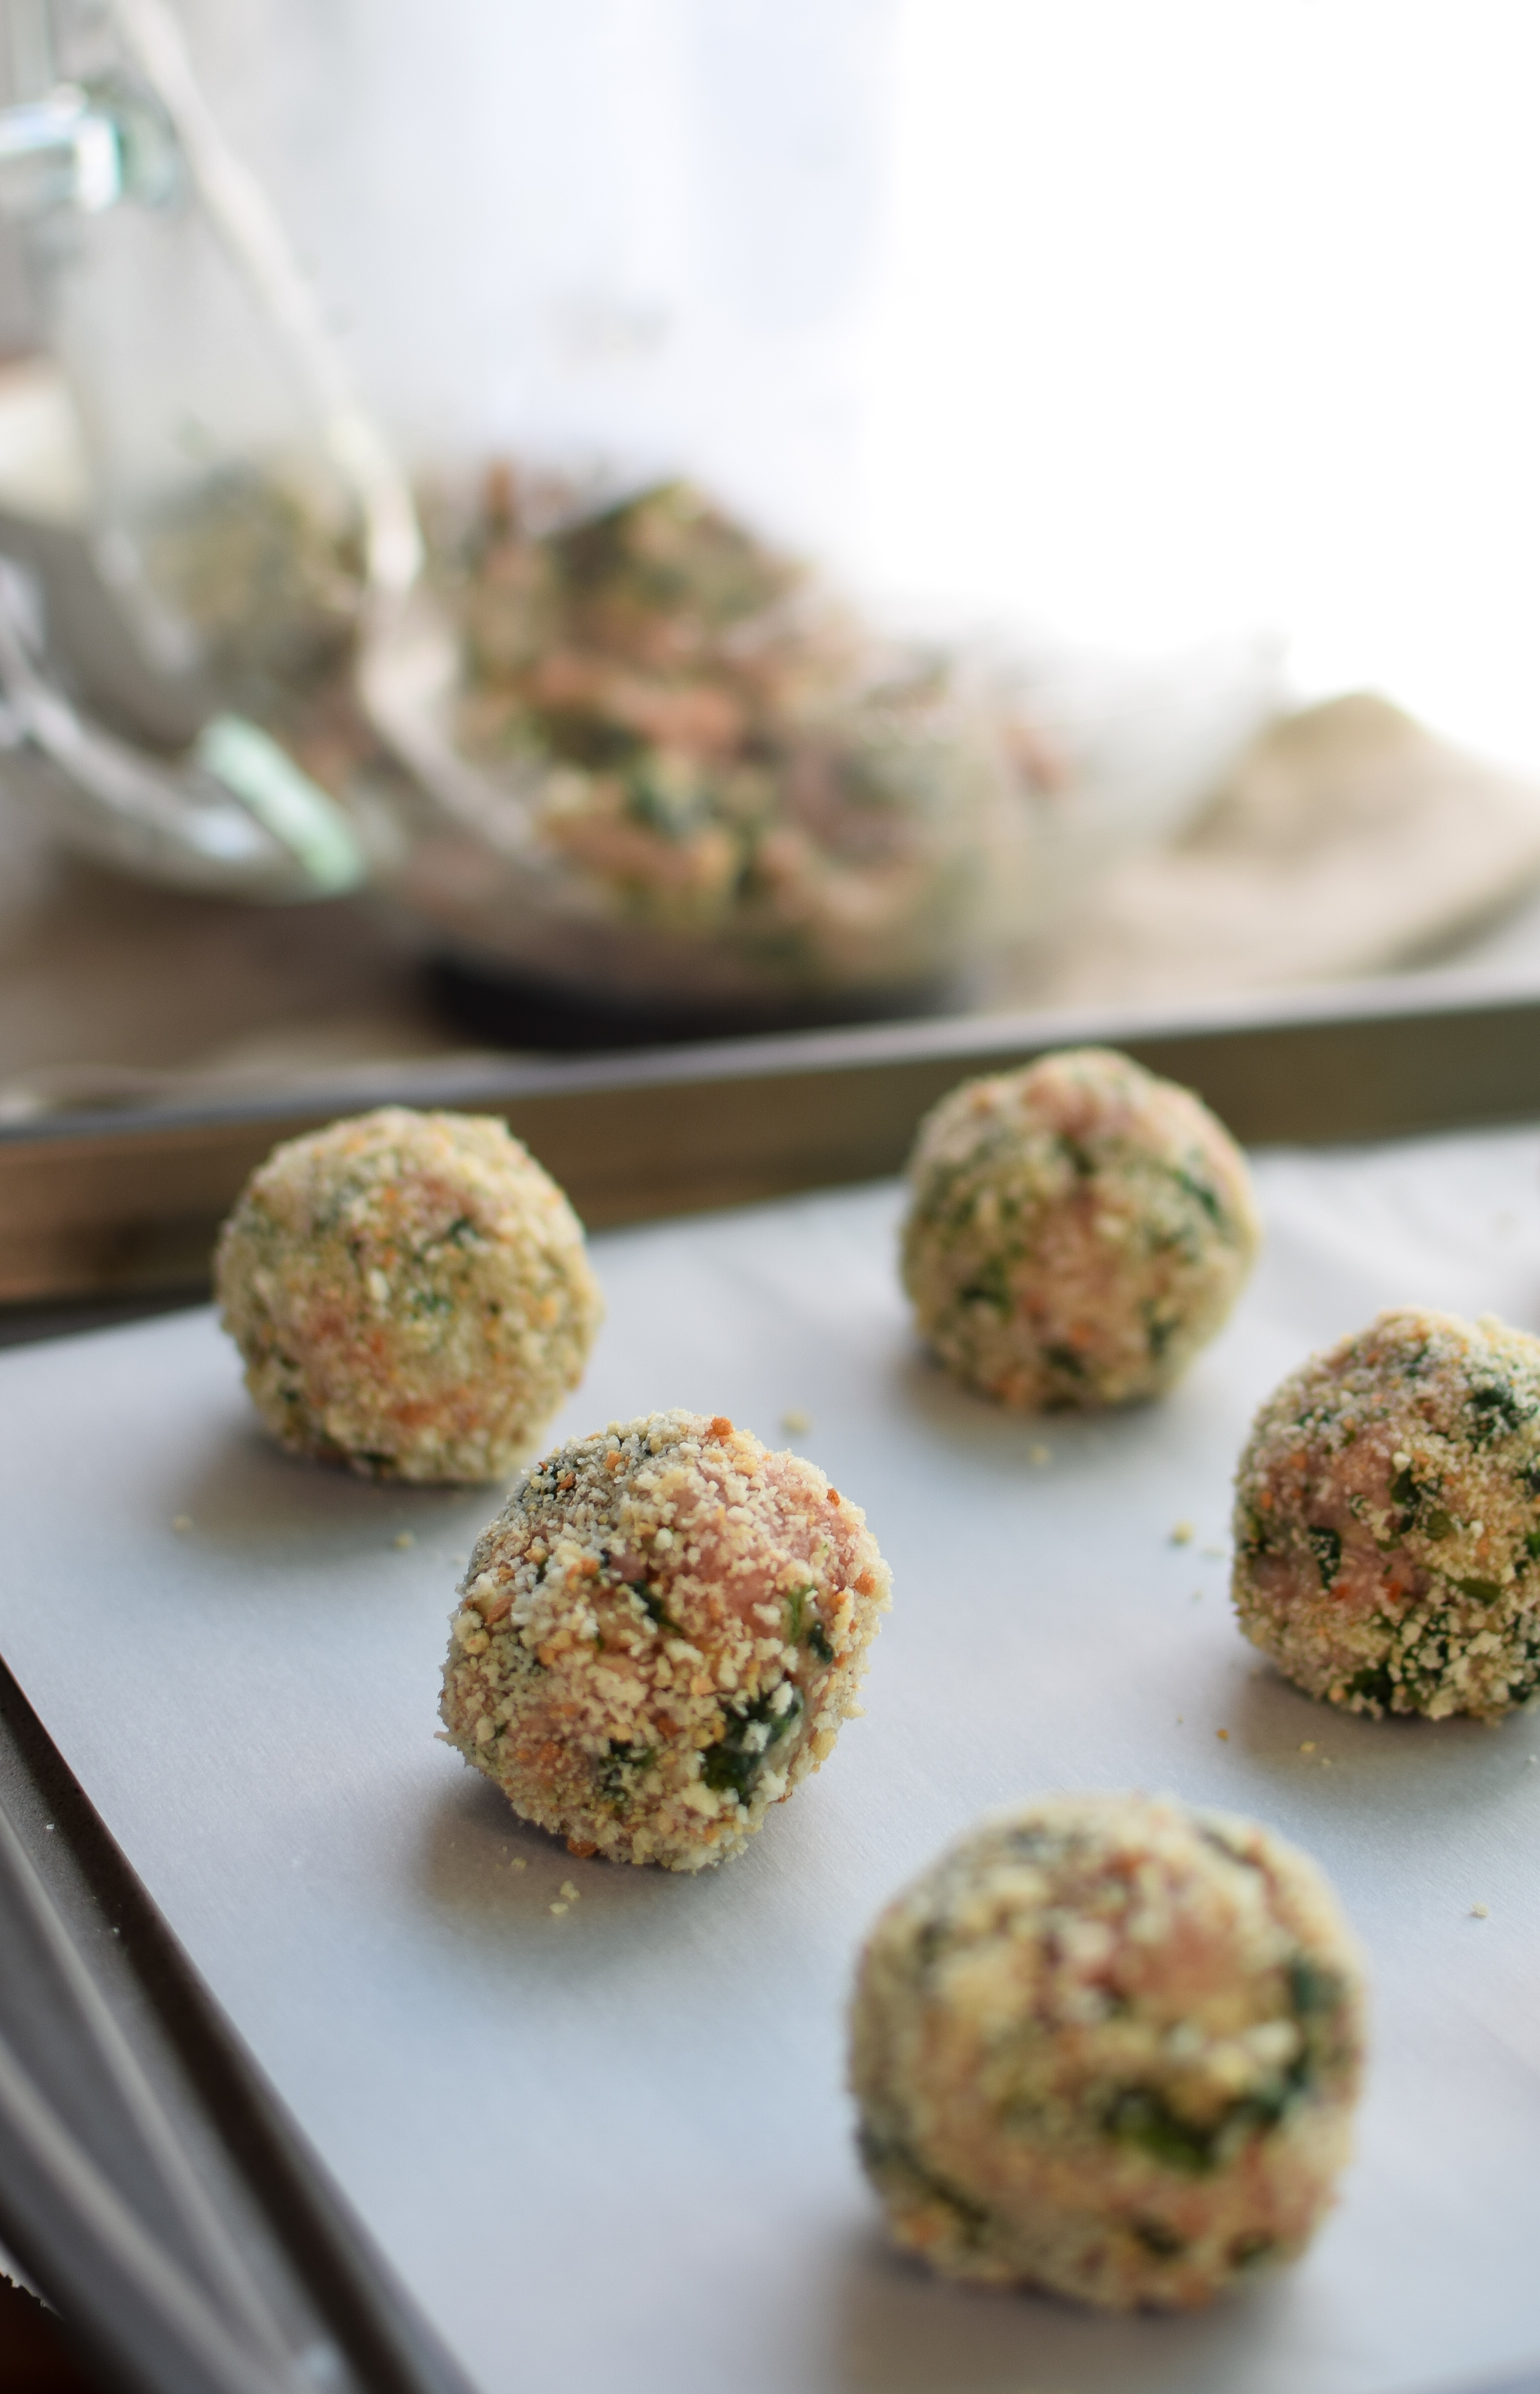 Spicy Baked Turkey Spinach Meatballs recipe - Ground turkey + spinach +all the right spices and a little heat make the best meatballs ever! - ProjectMealPlan.com